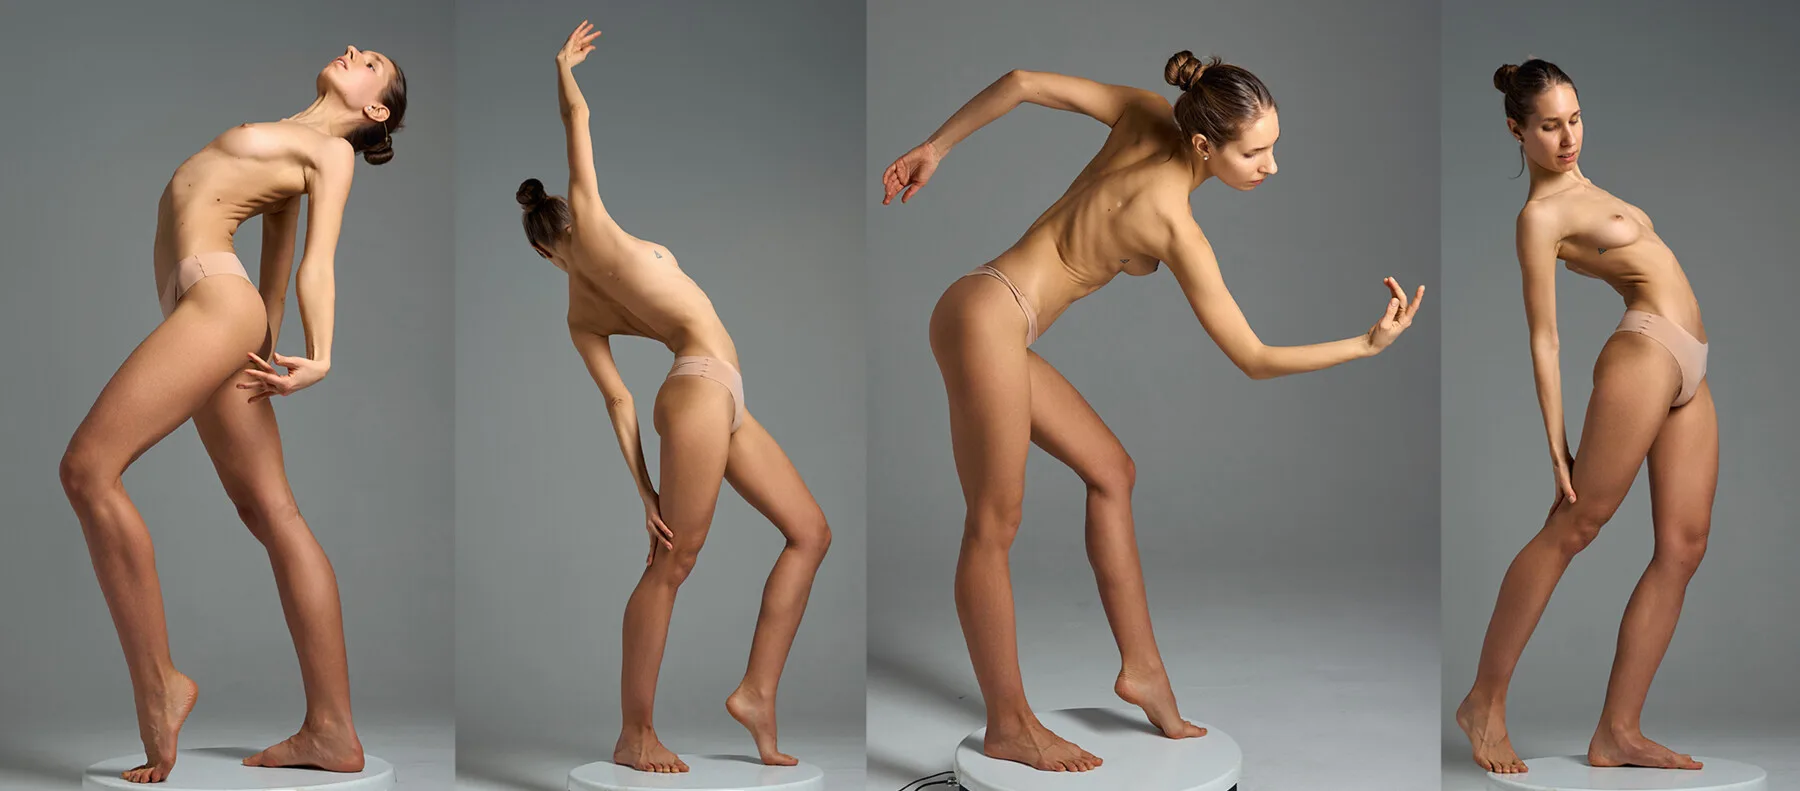 Expressive Female Poses Reference Pictures